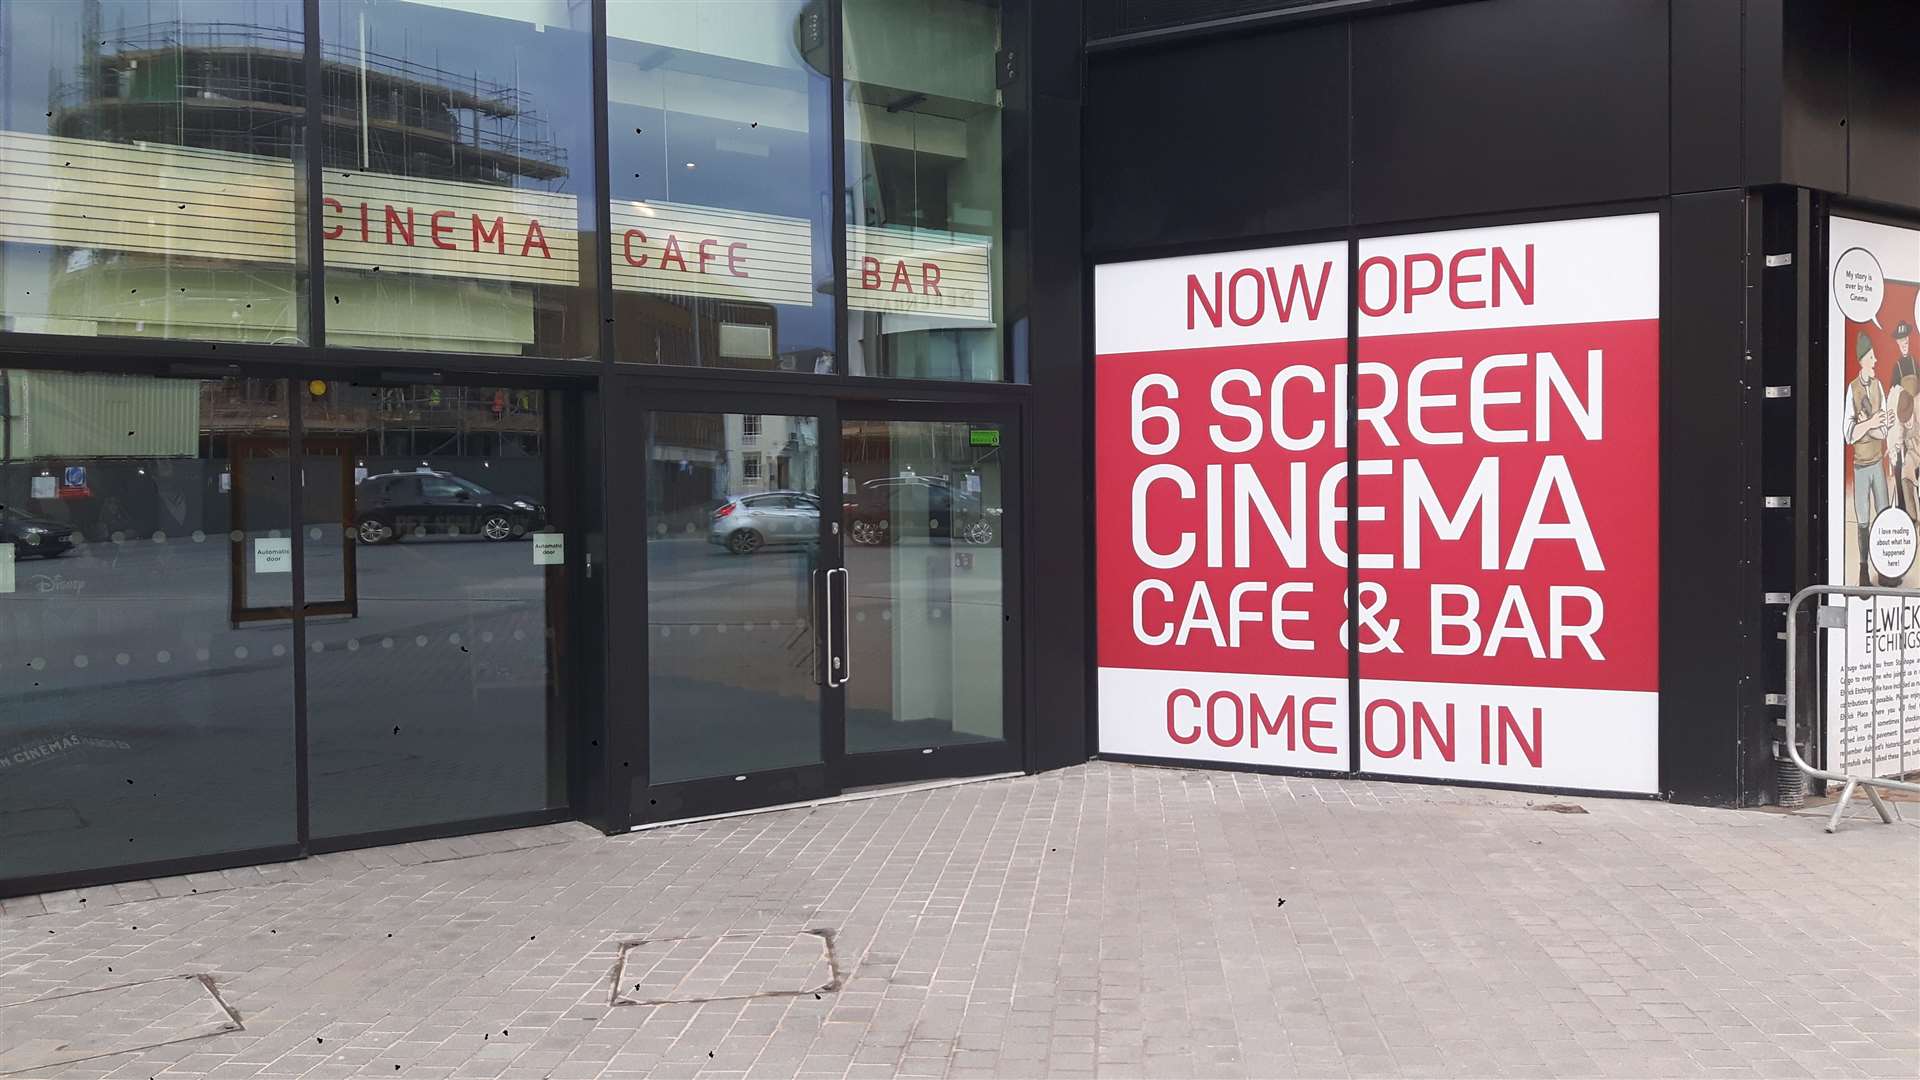 The Elwick Place Picturehouse opened in December last year